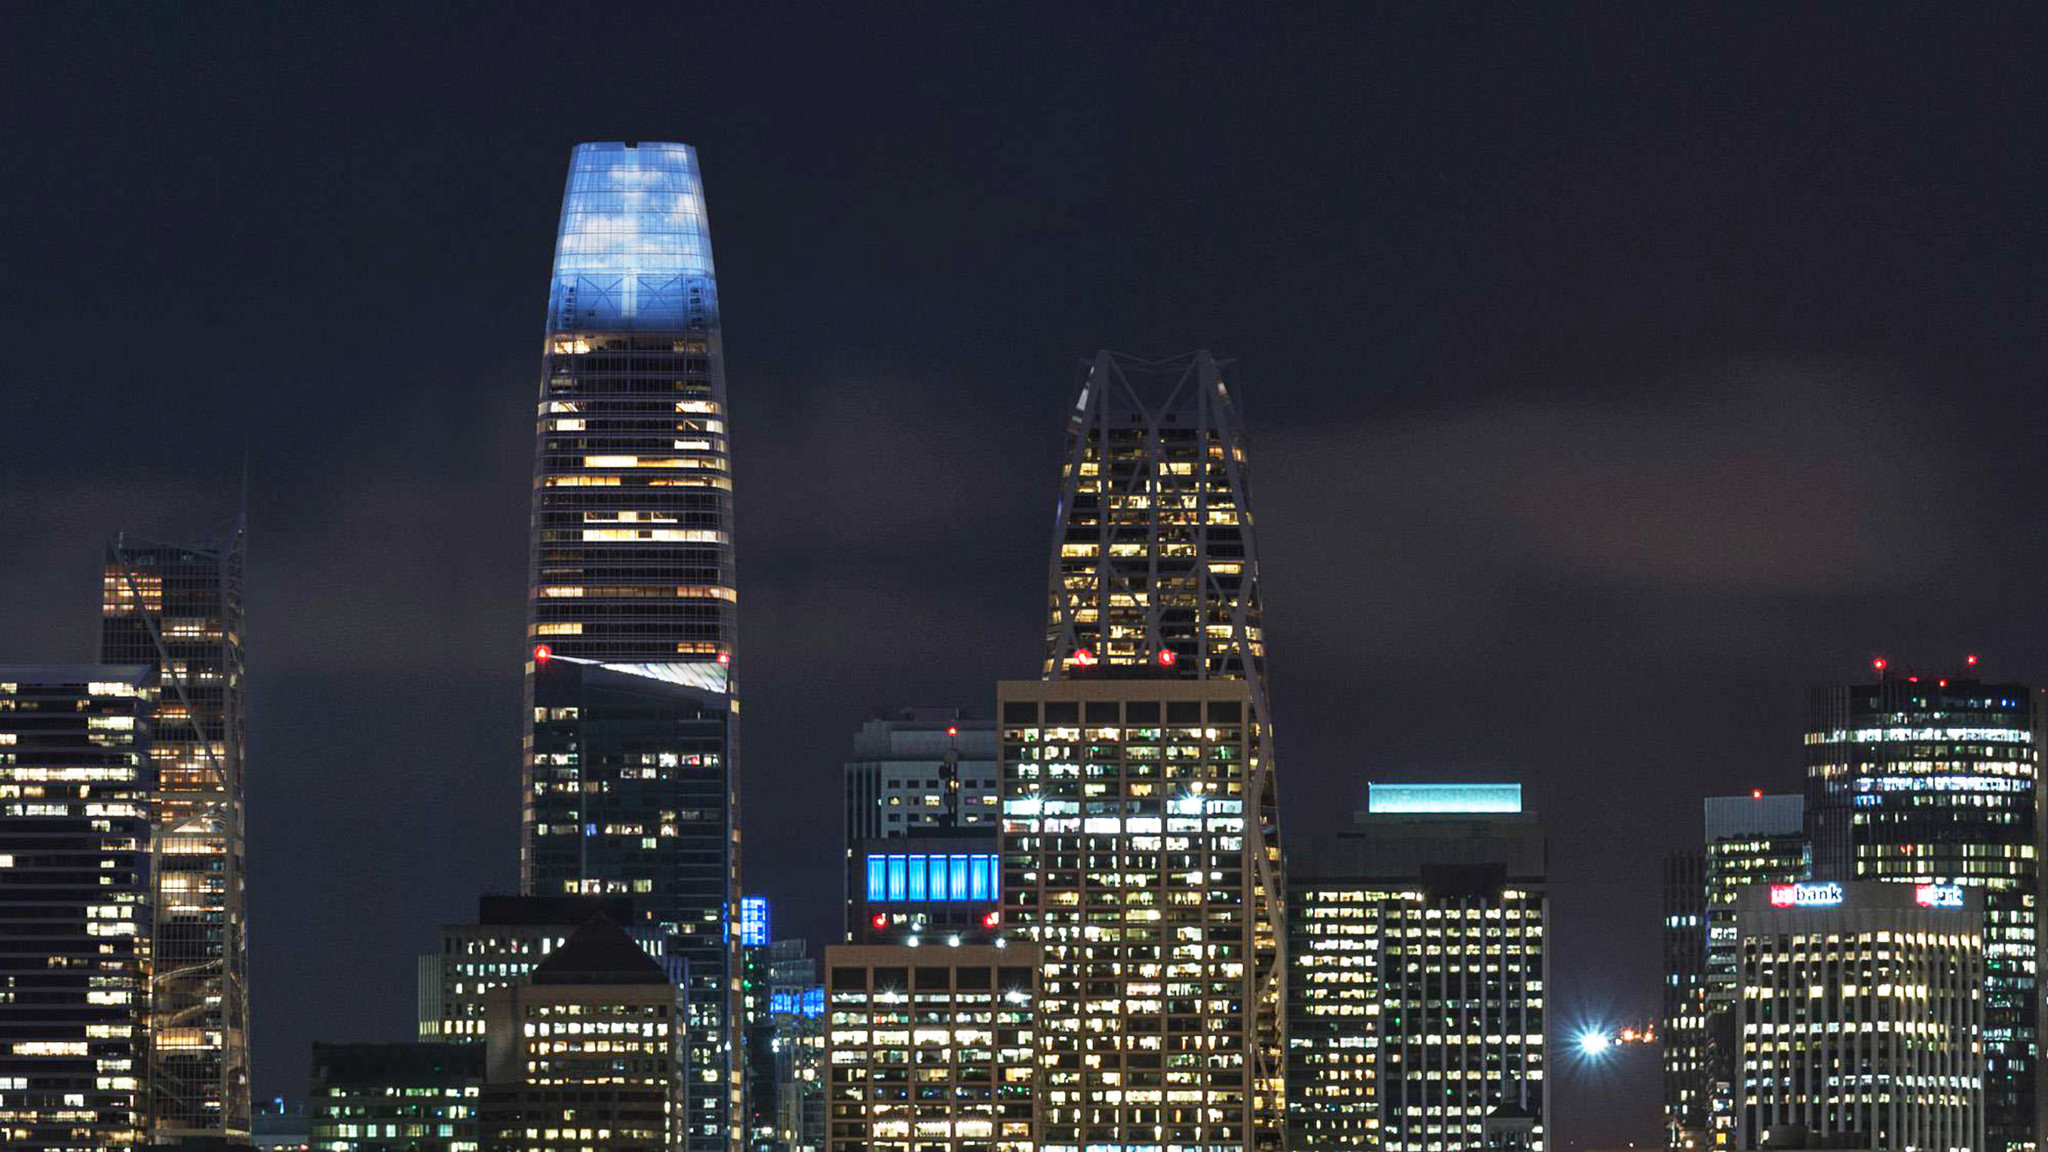 Artist's rendering of the nine-Story LED light sculpture atop the Salesforce Tower in San Francisco.